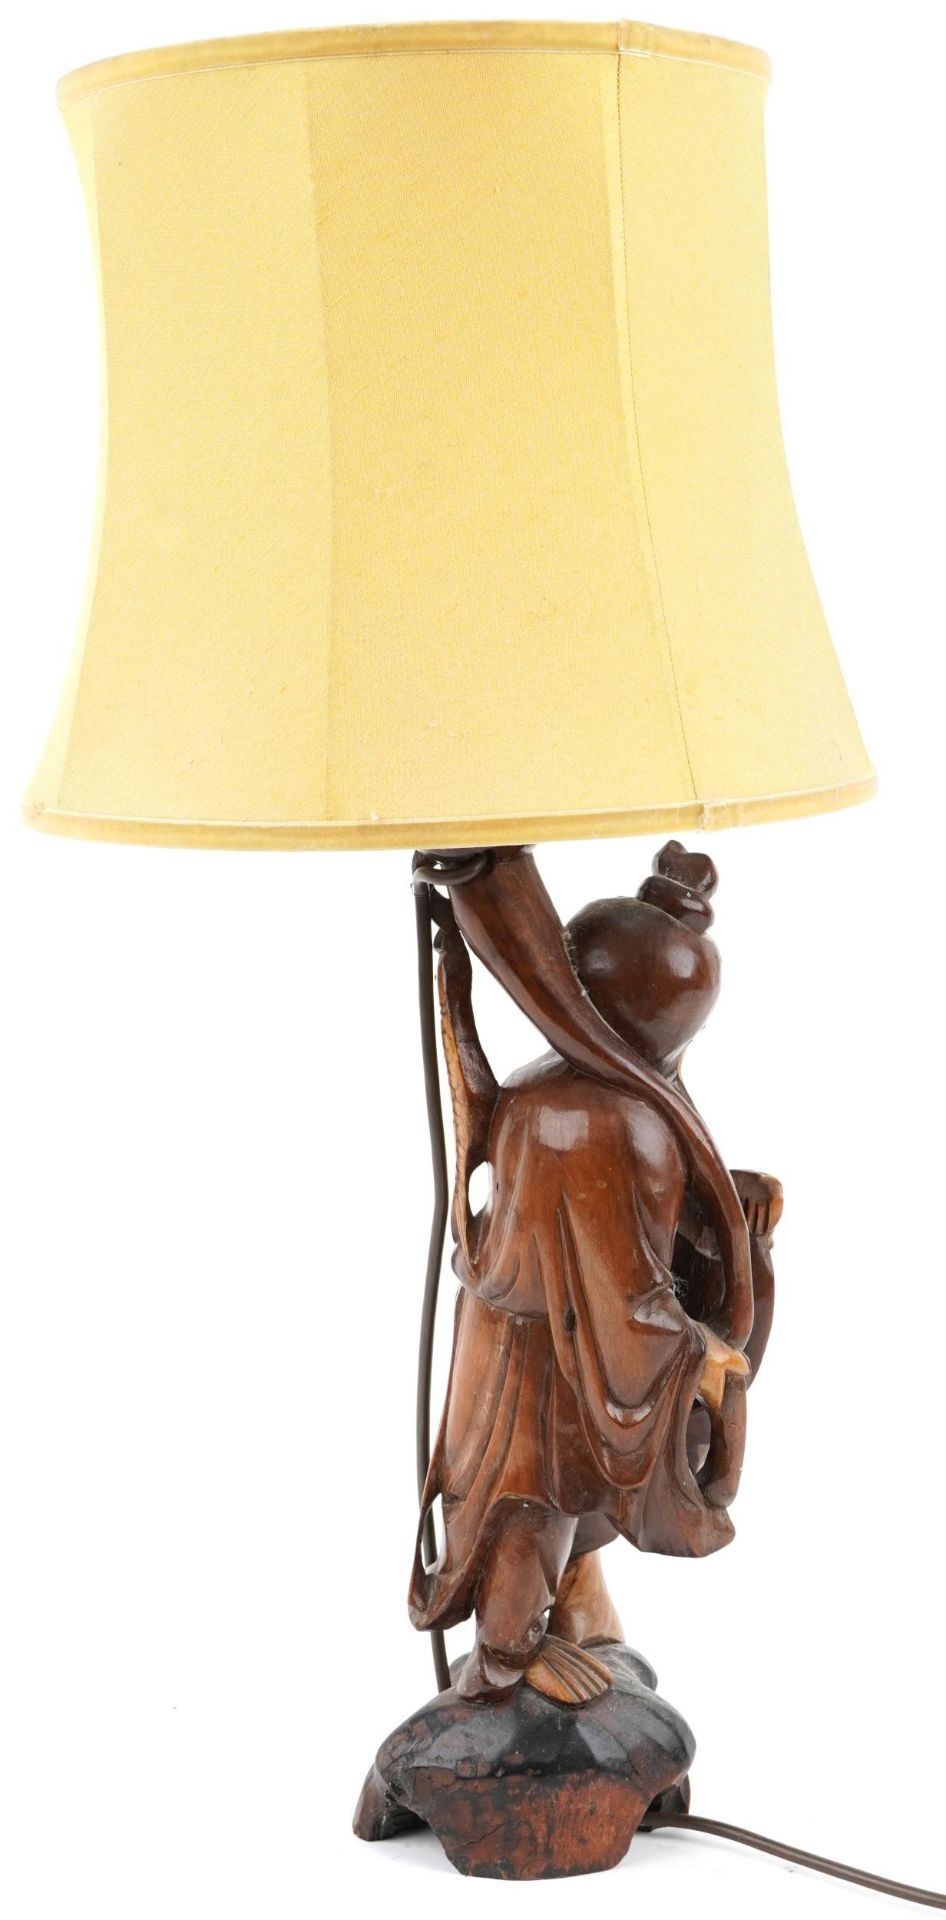 Chinese root wood table lamp with shade carved in the form of a fisherman, overall 68cm high : For - Image 2 of 3